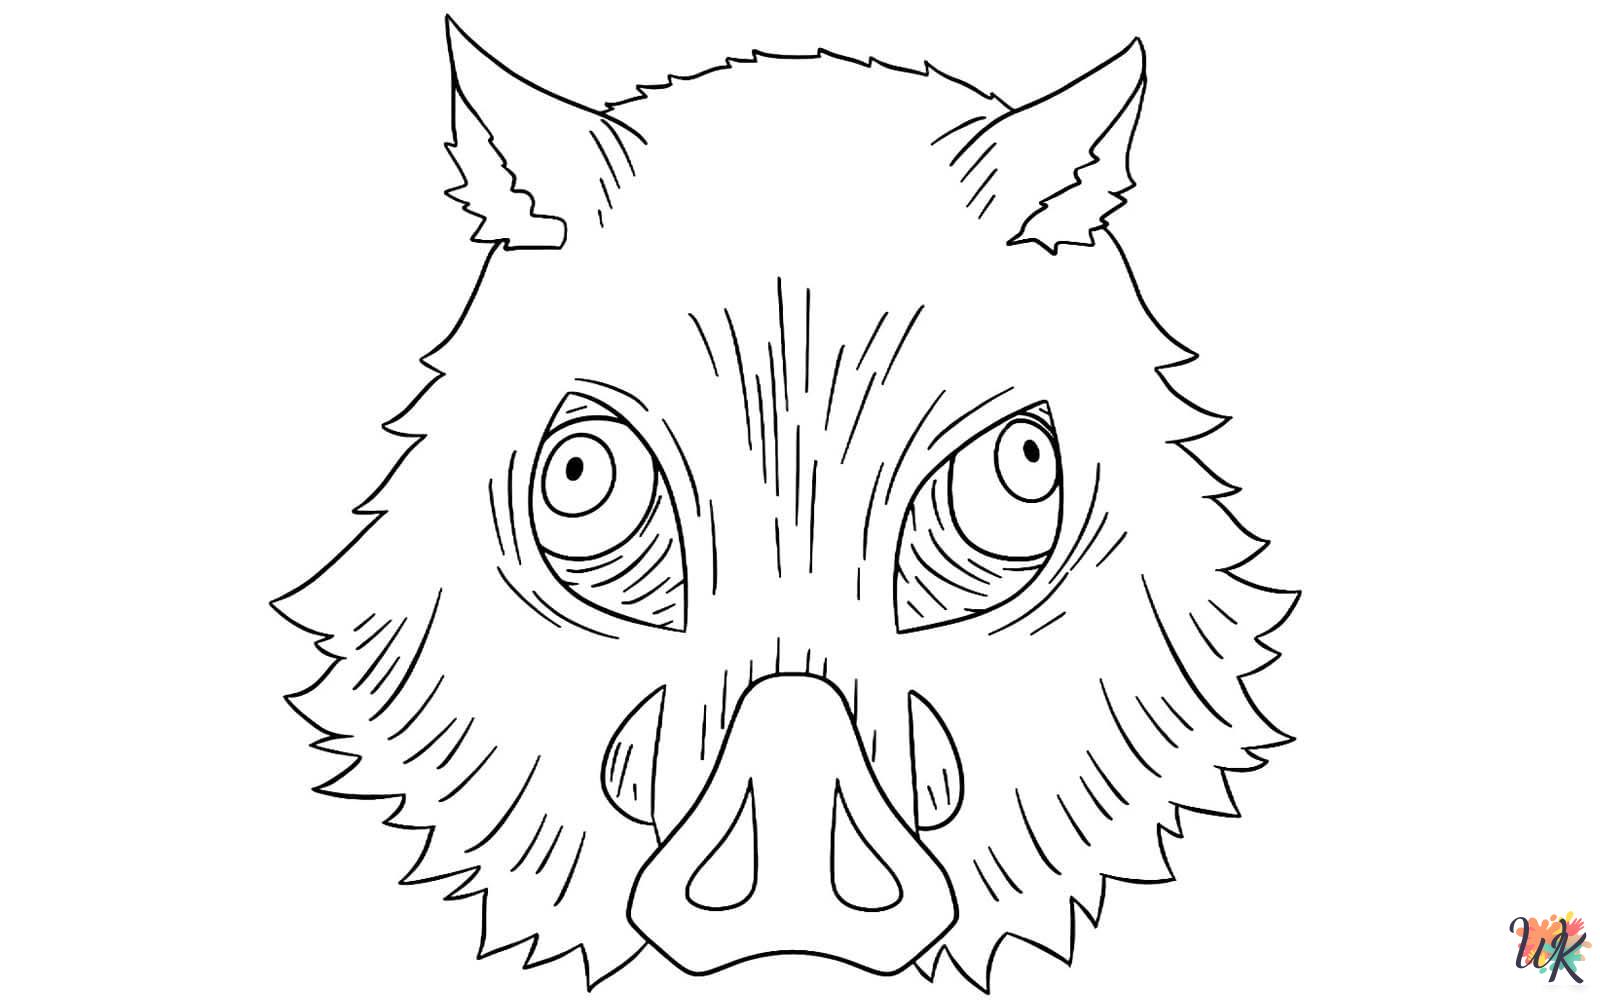 Inosuke coloring pages for kids